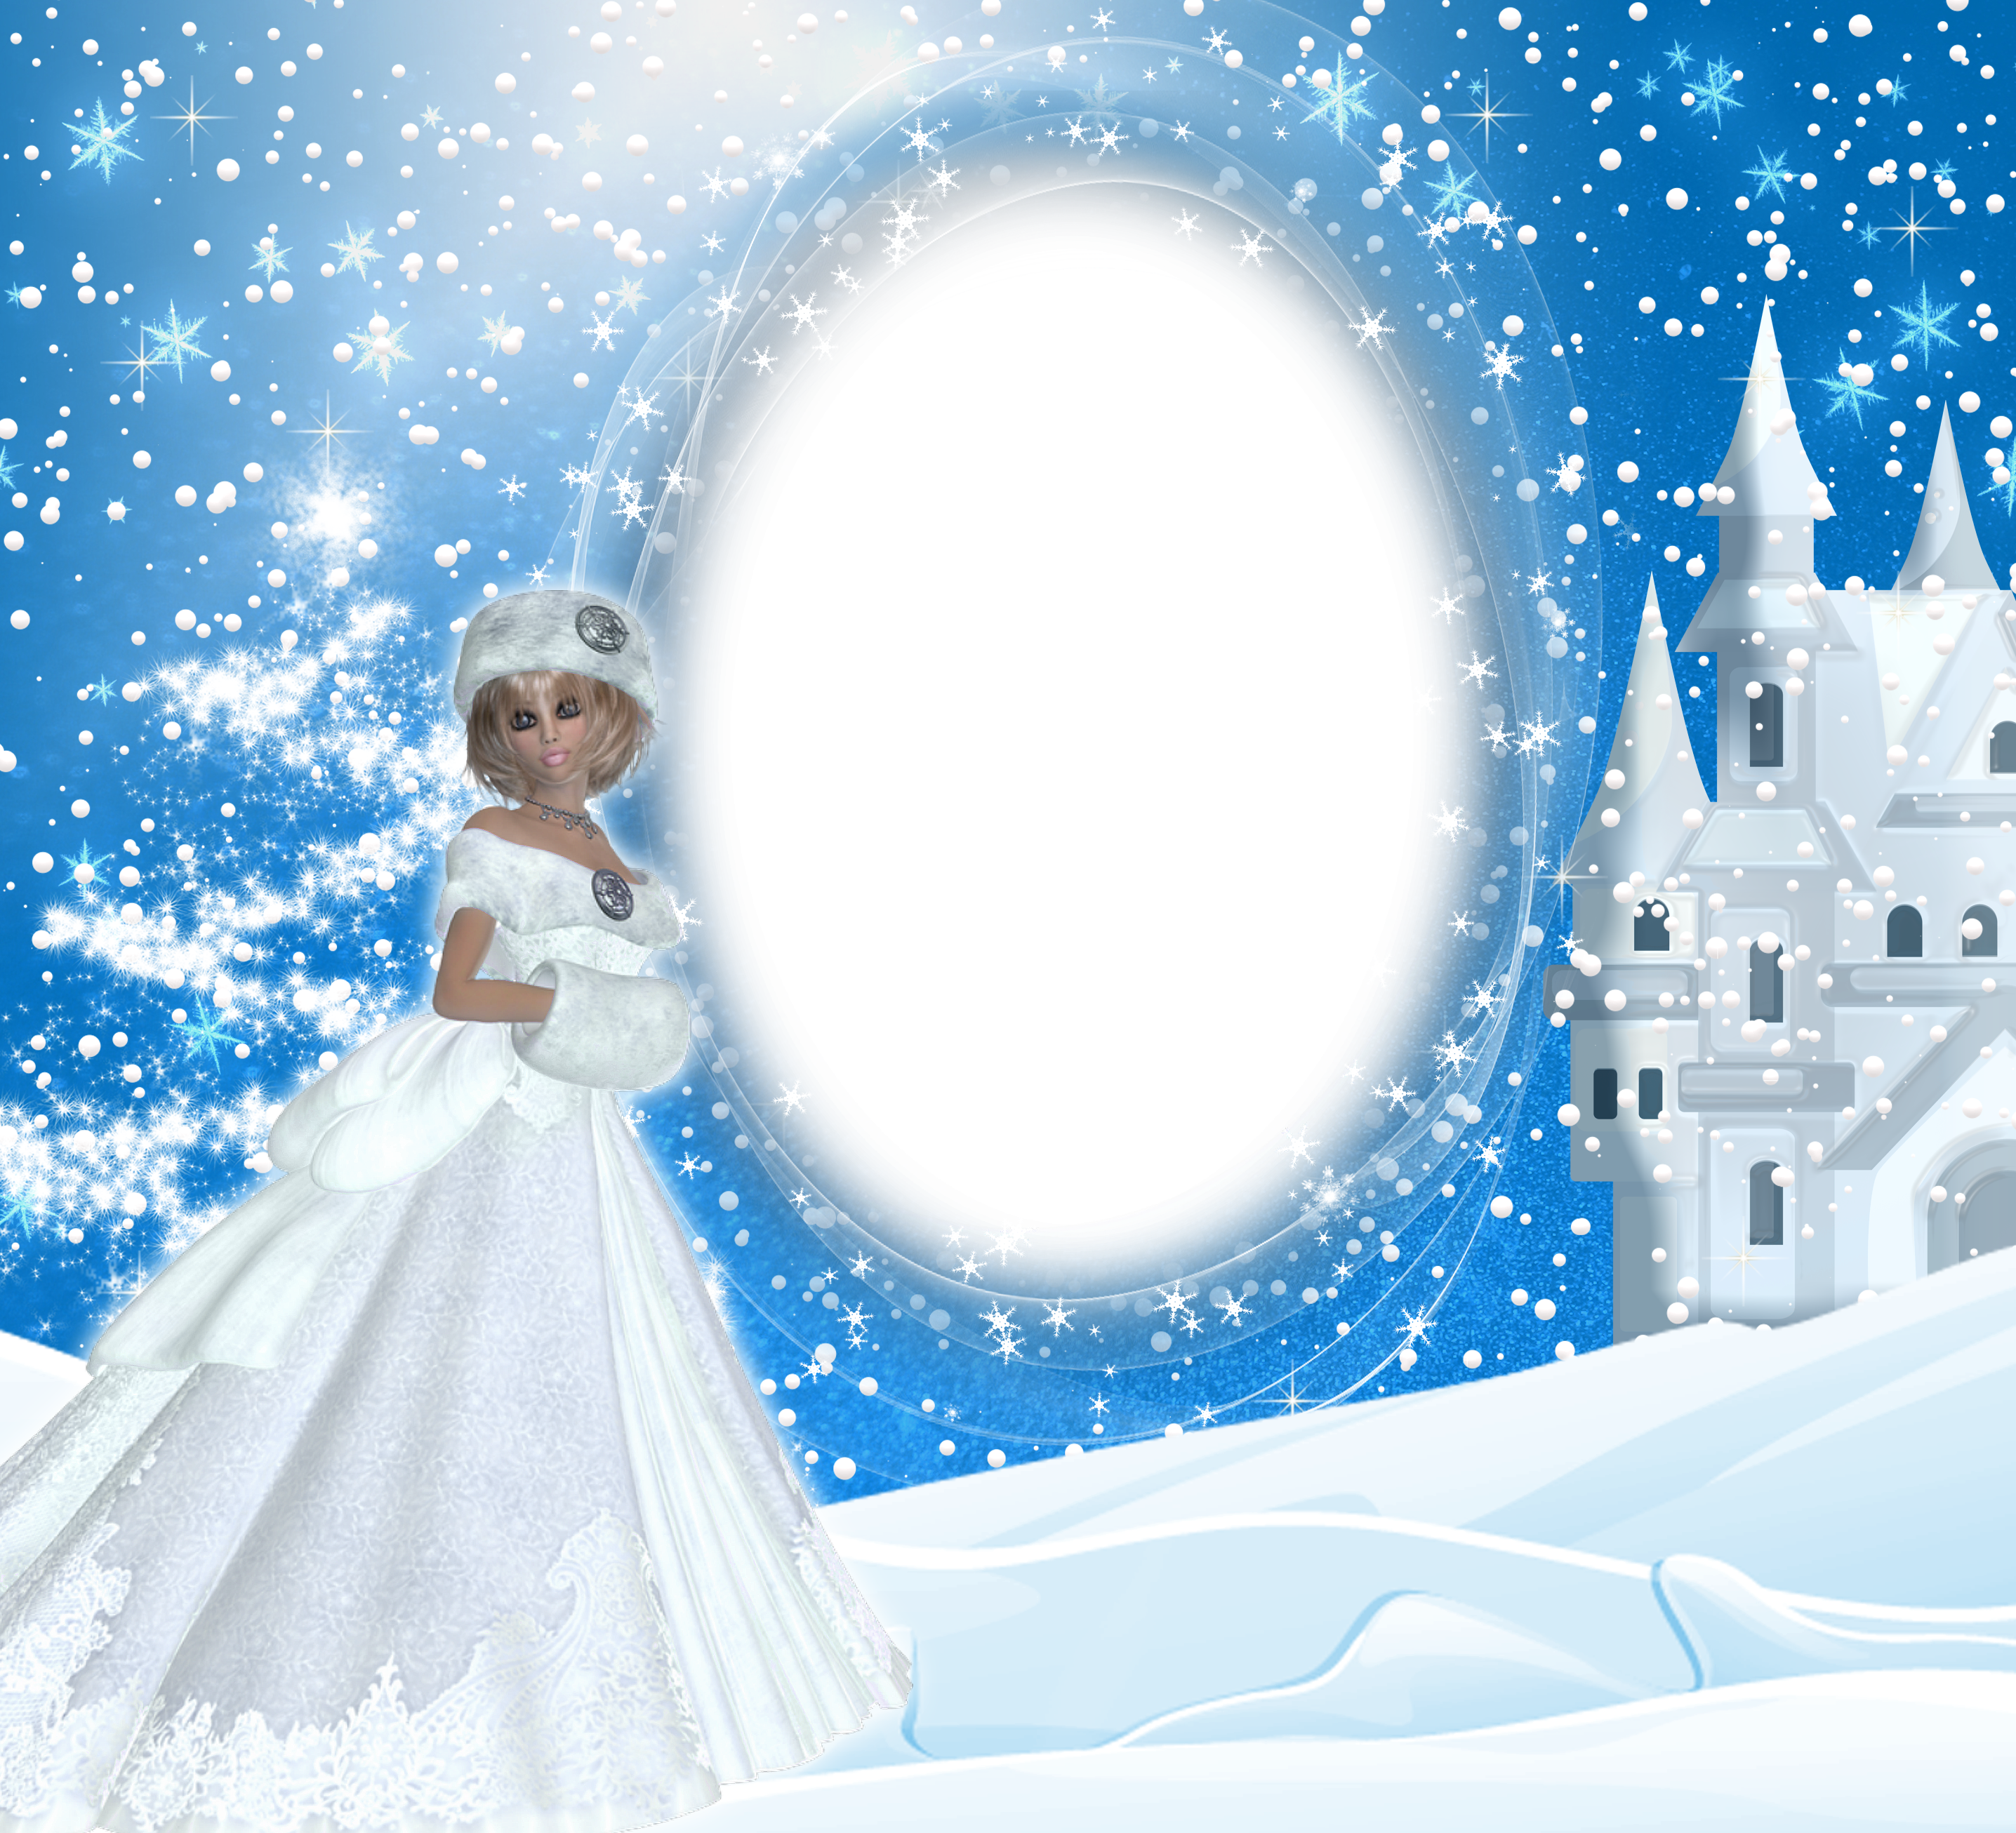 Winter clipart frame. Snow lady png gallery